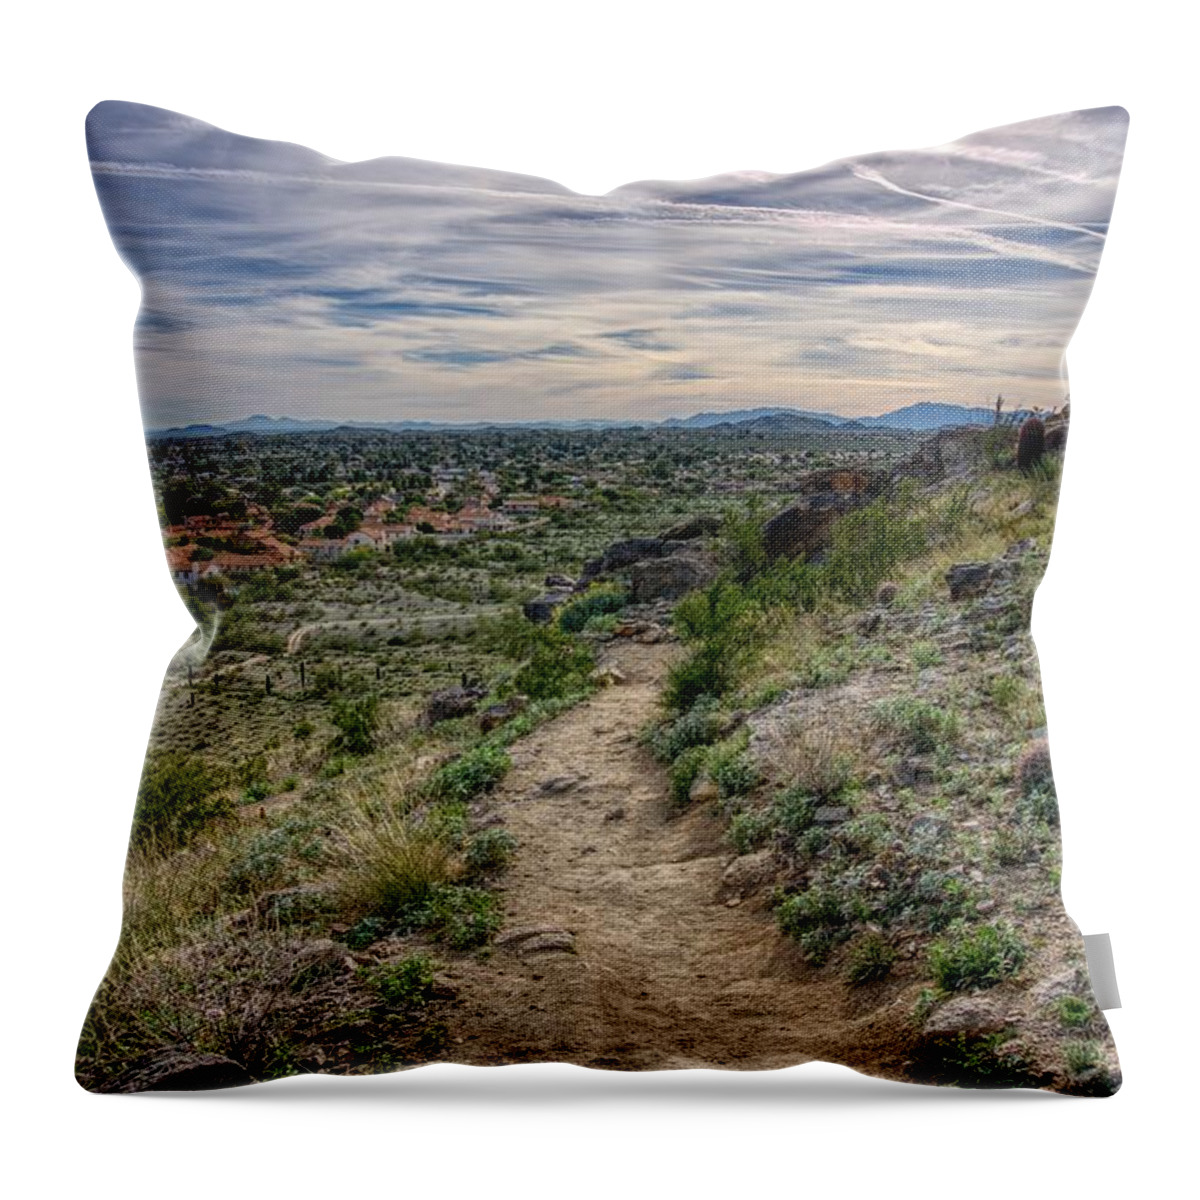 Sunsets Throw Pillow featuring the photograph Following The Desert Path by Anthony Giammarino